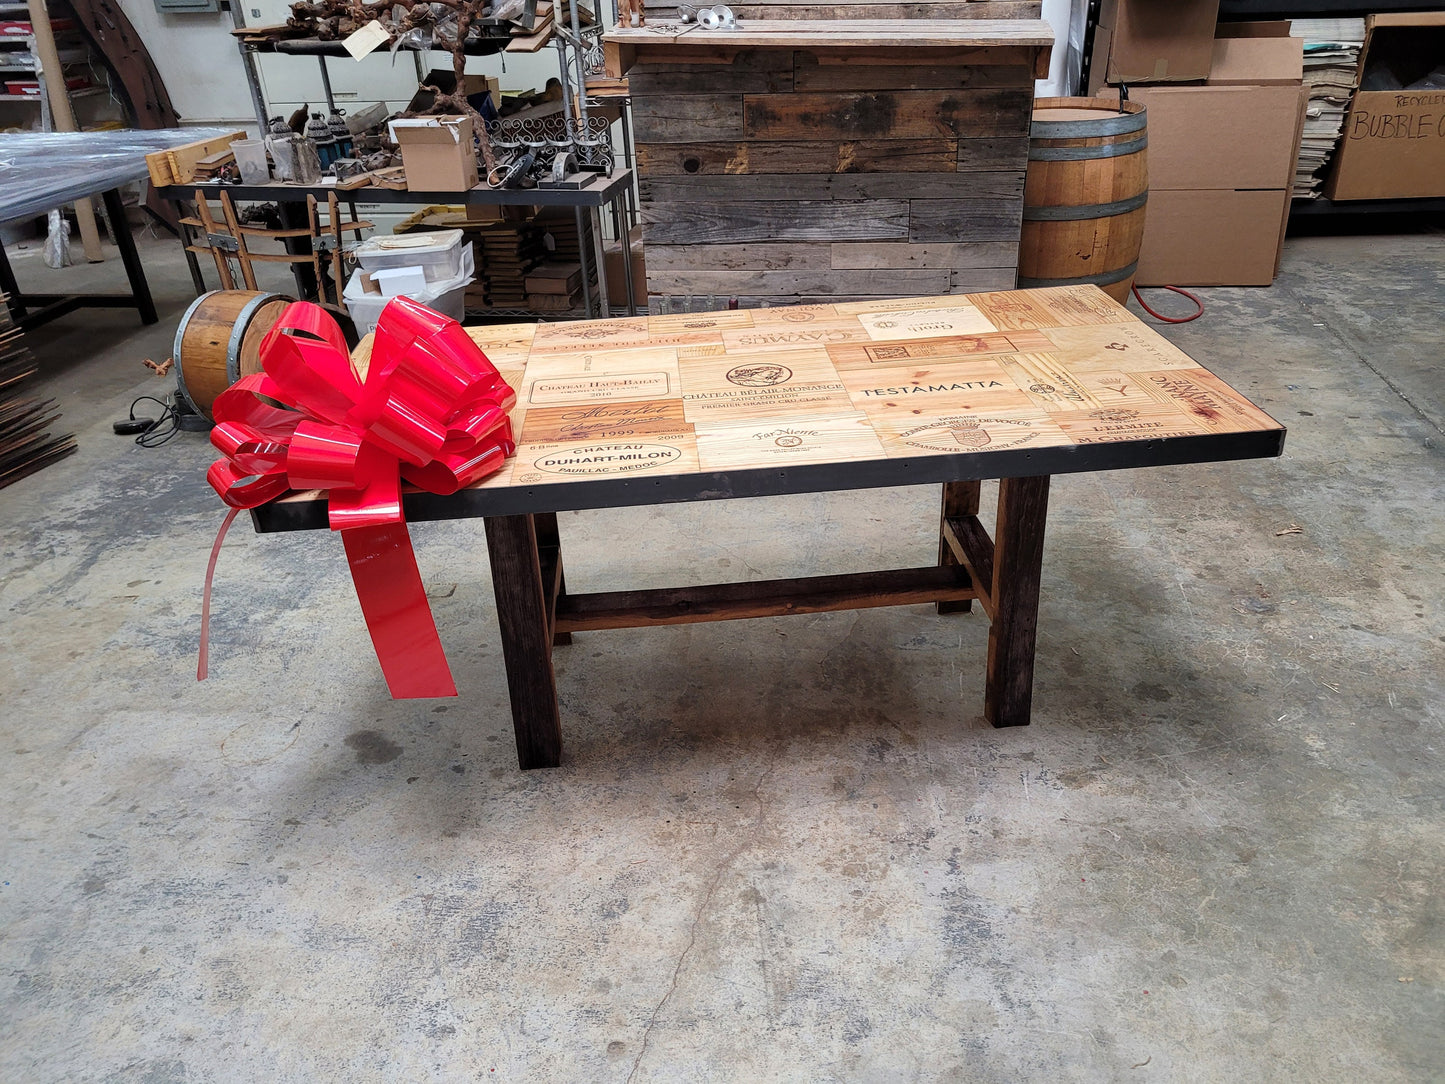 Wine Crate Dining Table - Batang - Made from reclaimed wine barrels and wine crates. 100% Recycled!